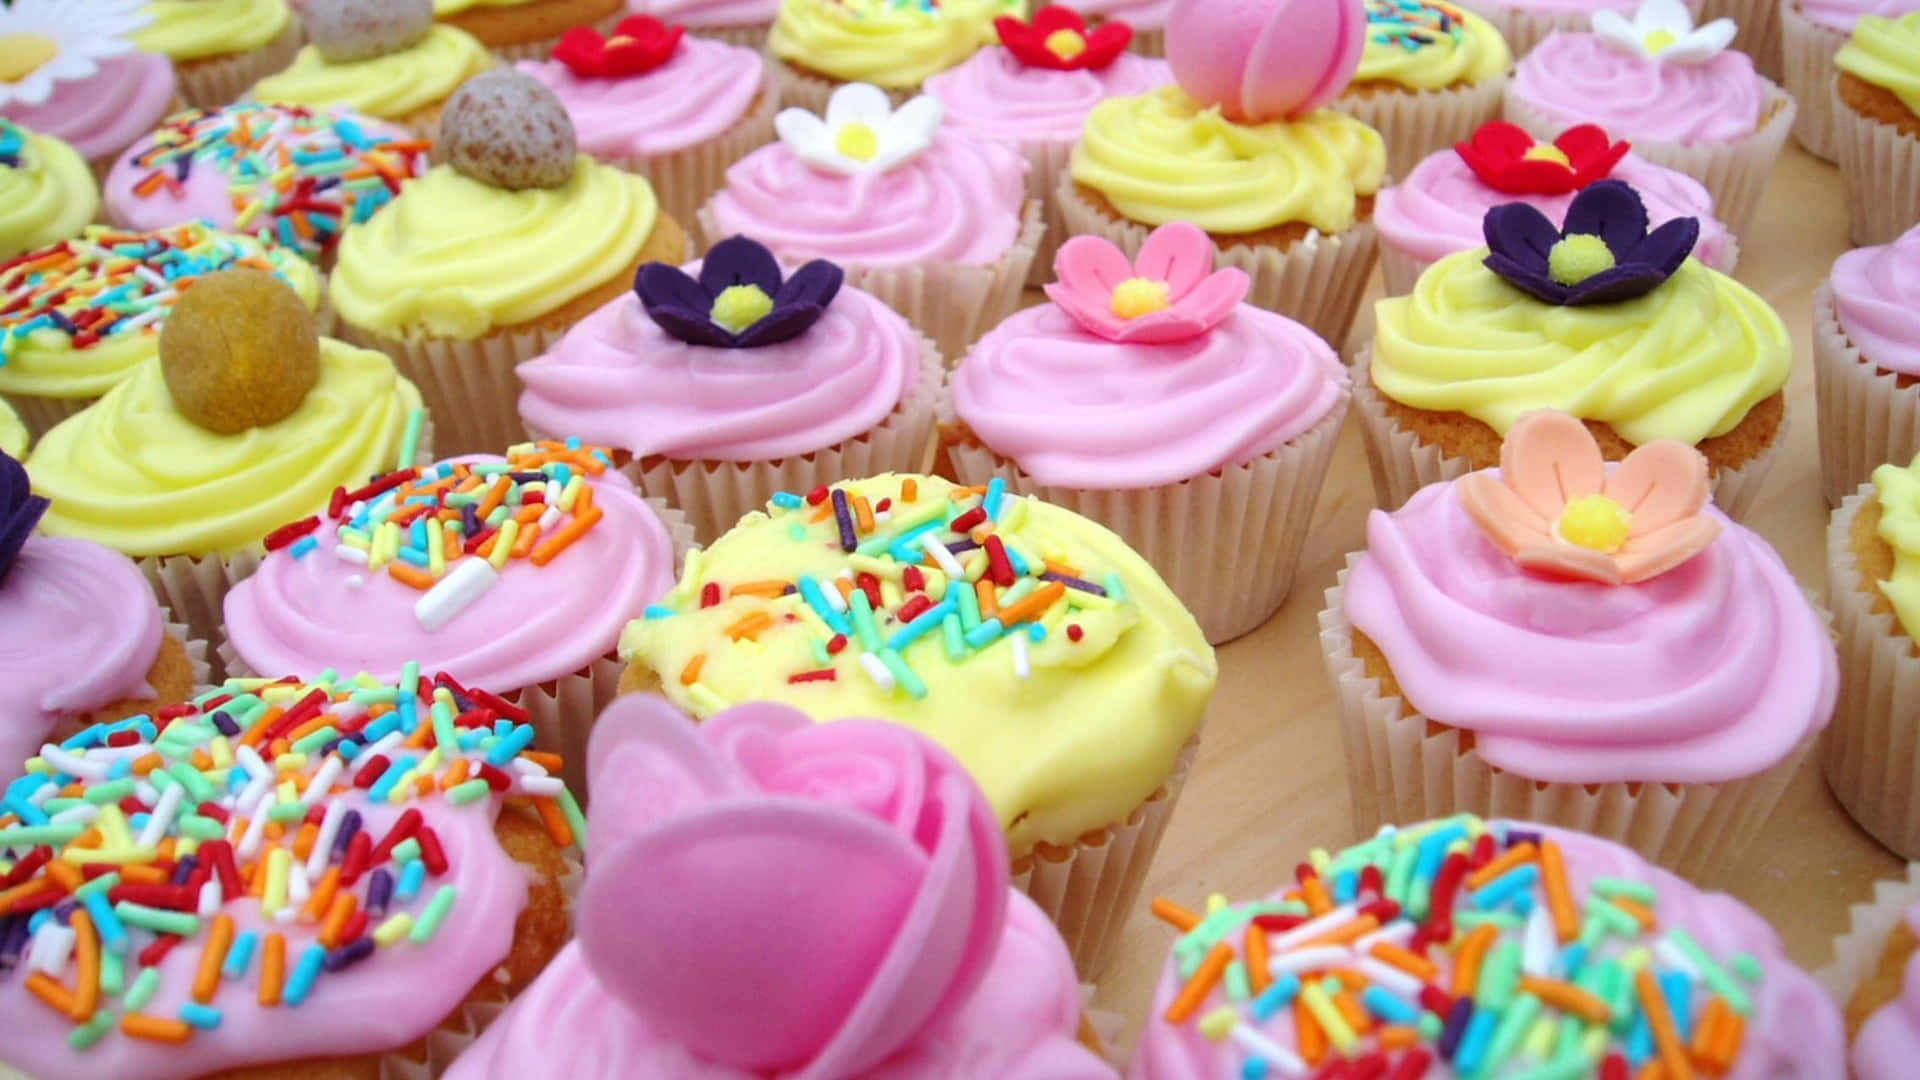 Yummy Cupcakes With Flowers And Sprinkles